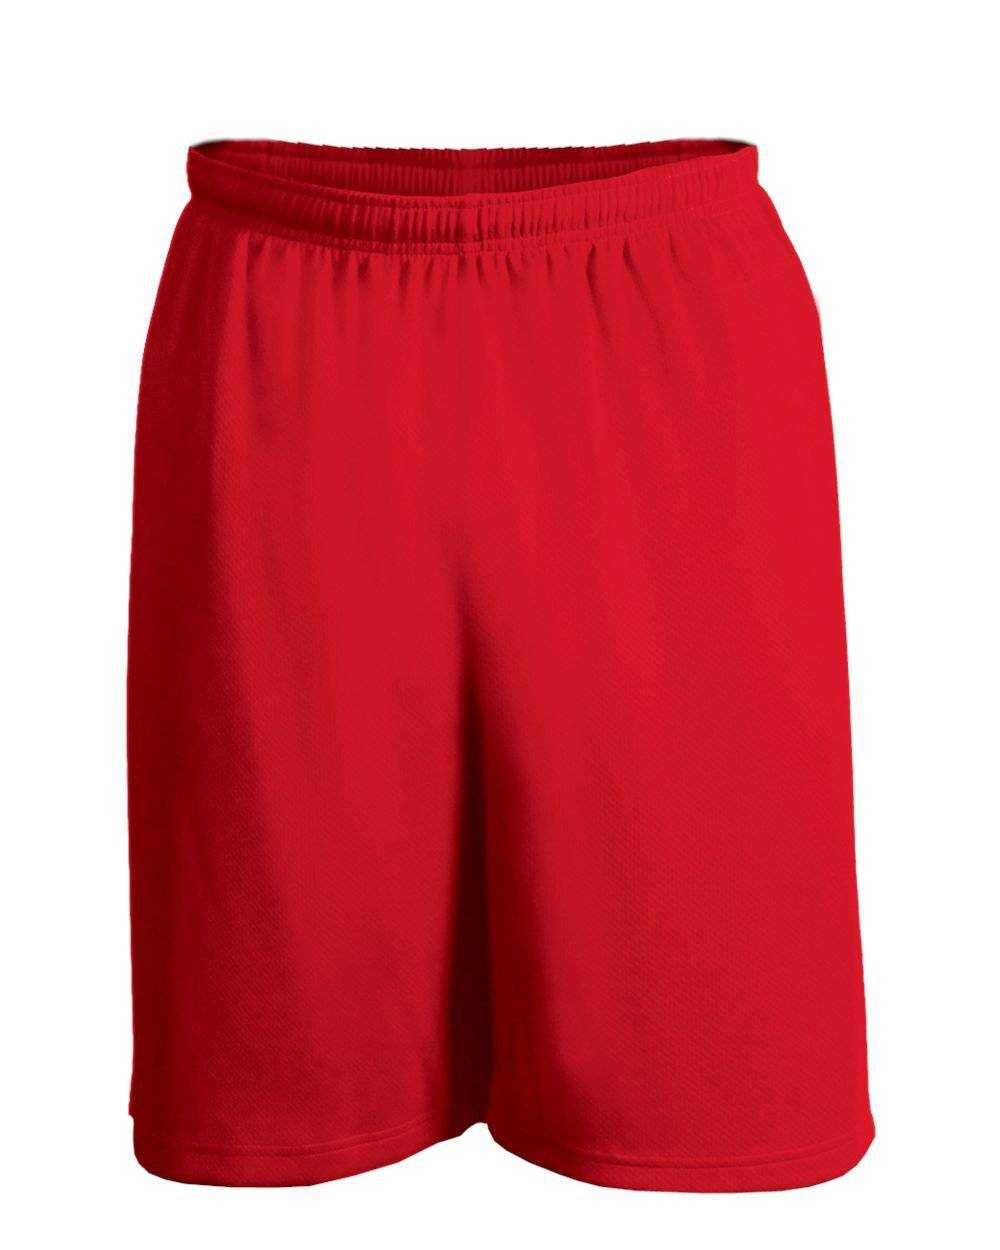 C2 Sport 5139 Mock Mesh 9" Short - Red - HIT a Double - 1